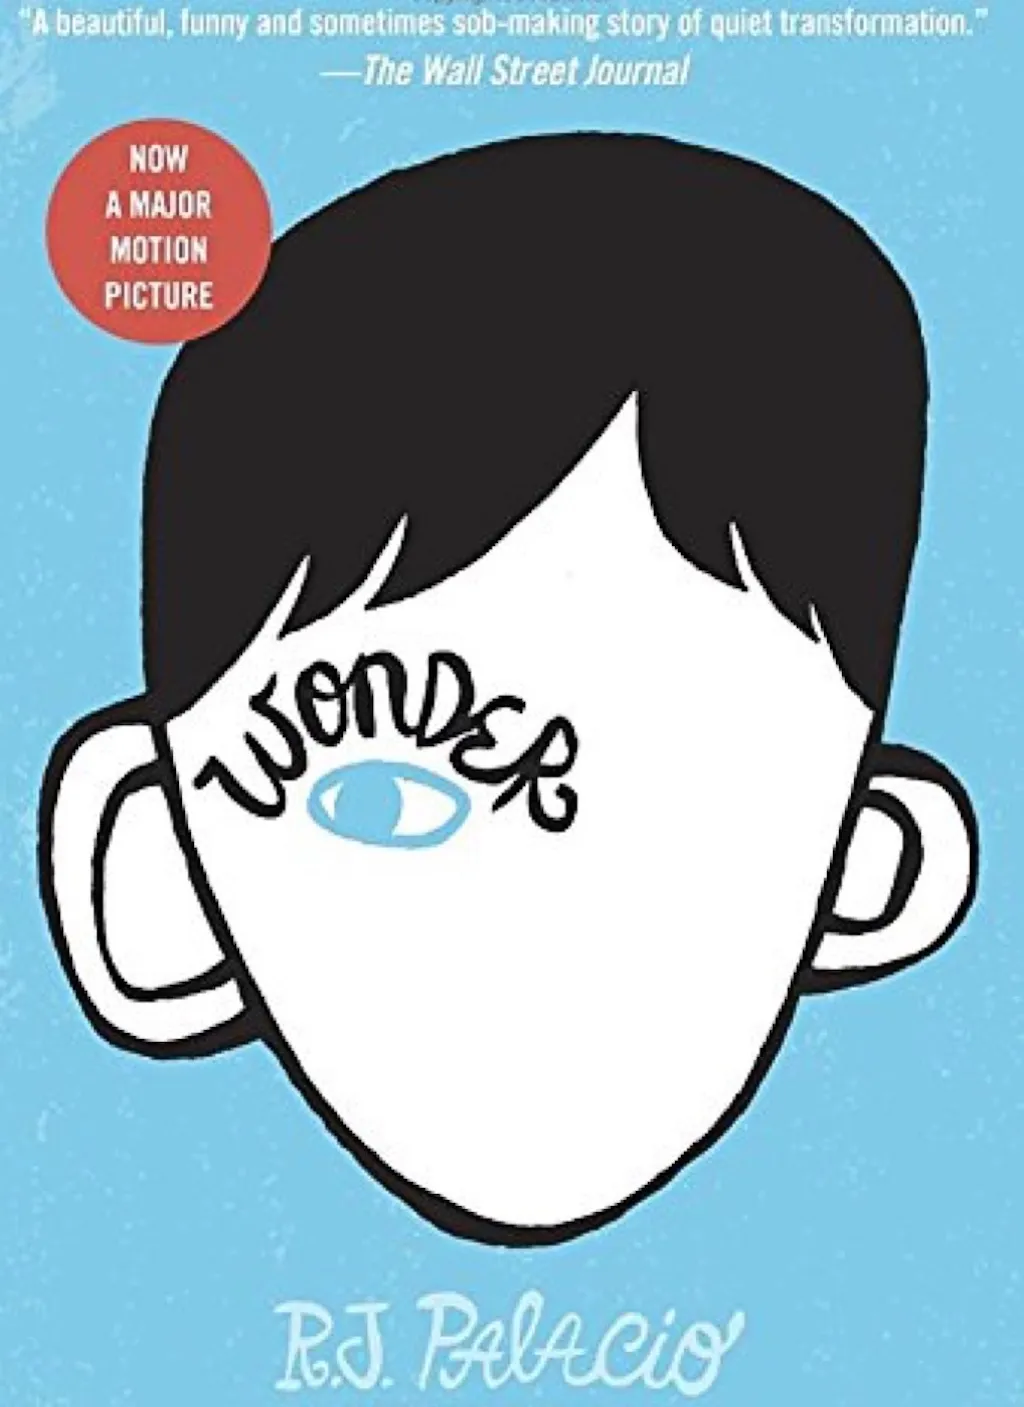 Wonder by RJ Palacio books every woman should read in her 40s